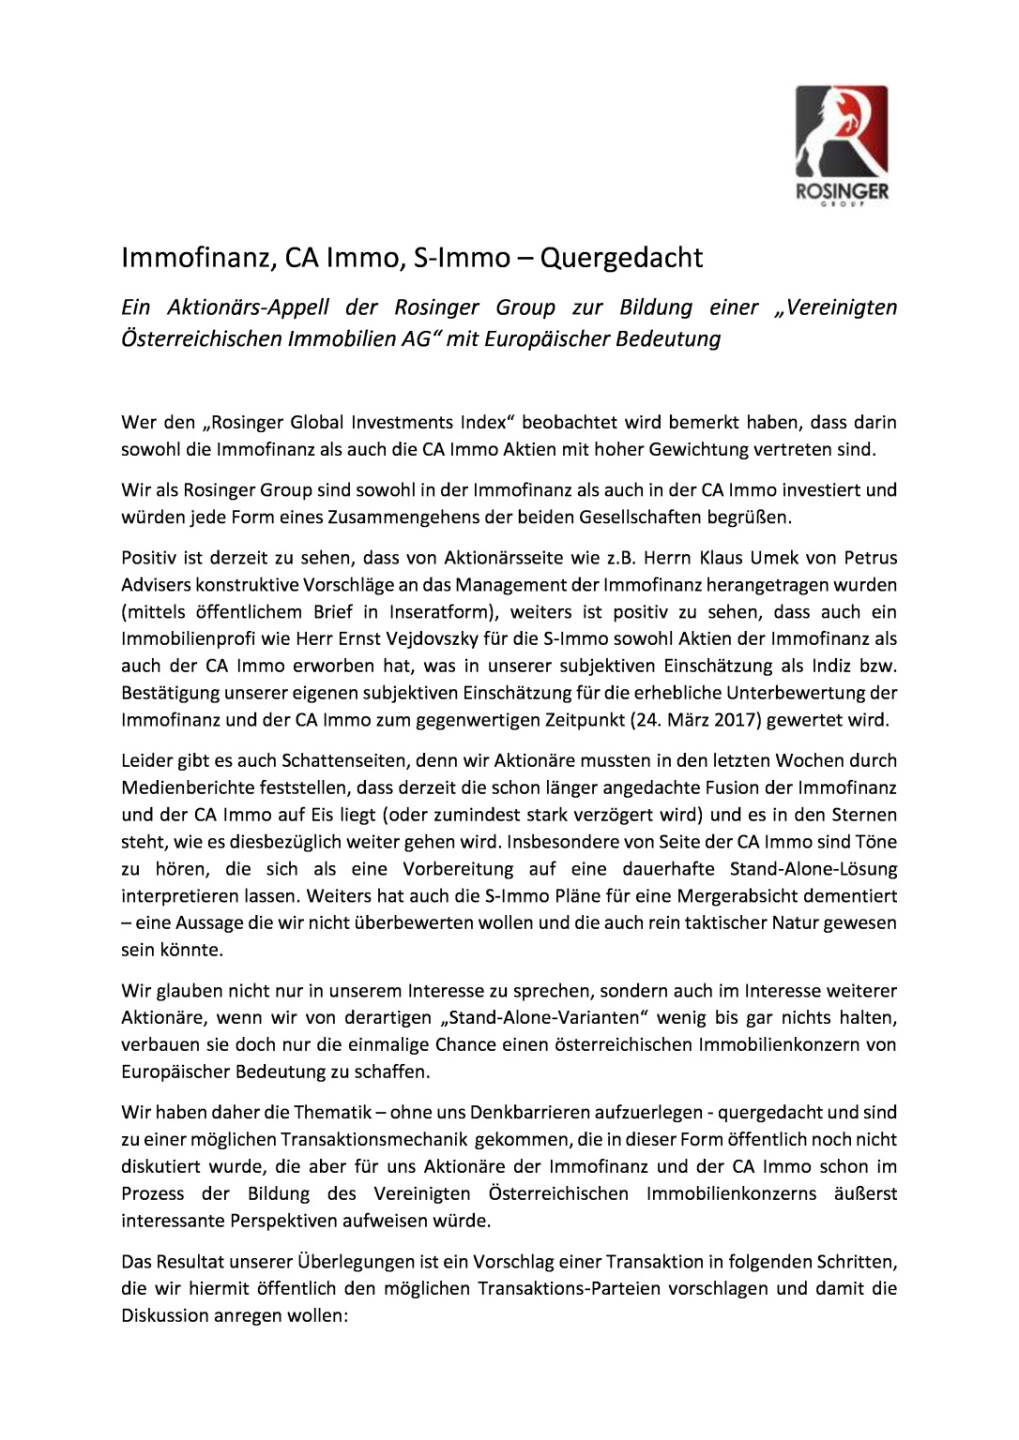 Rosinger Group: Appell Immofinanz CA Immo, Seite 1/2, komplettes Dokument unter http://boerse-social.com/static/uploads/file_2180_rosinger_group_appell_immofinanz_ca_immo.pdf